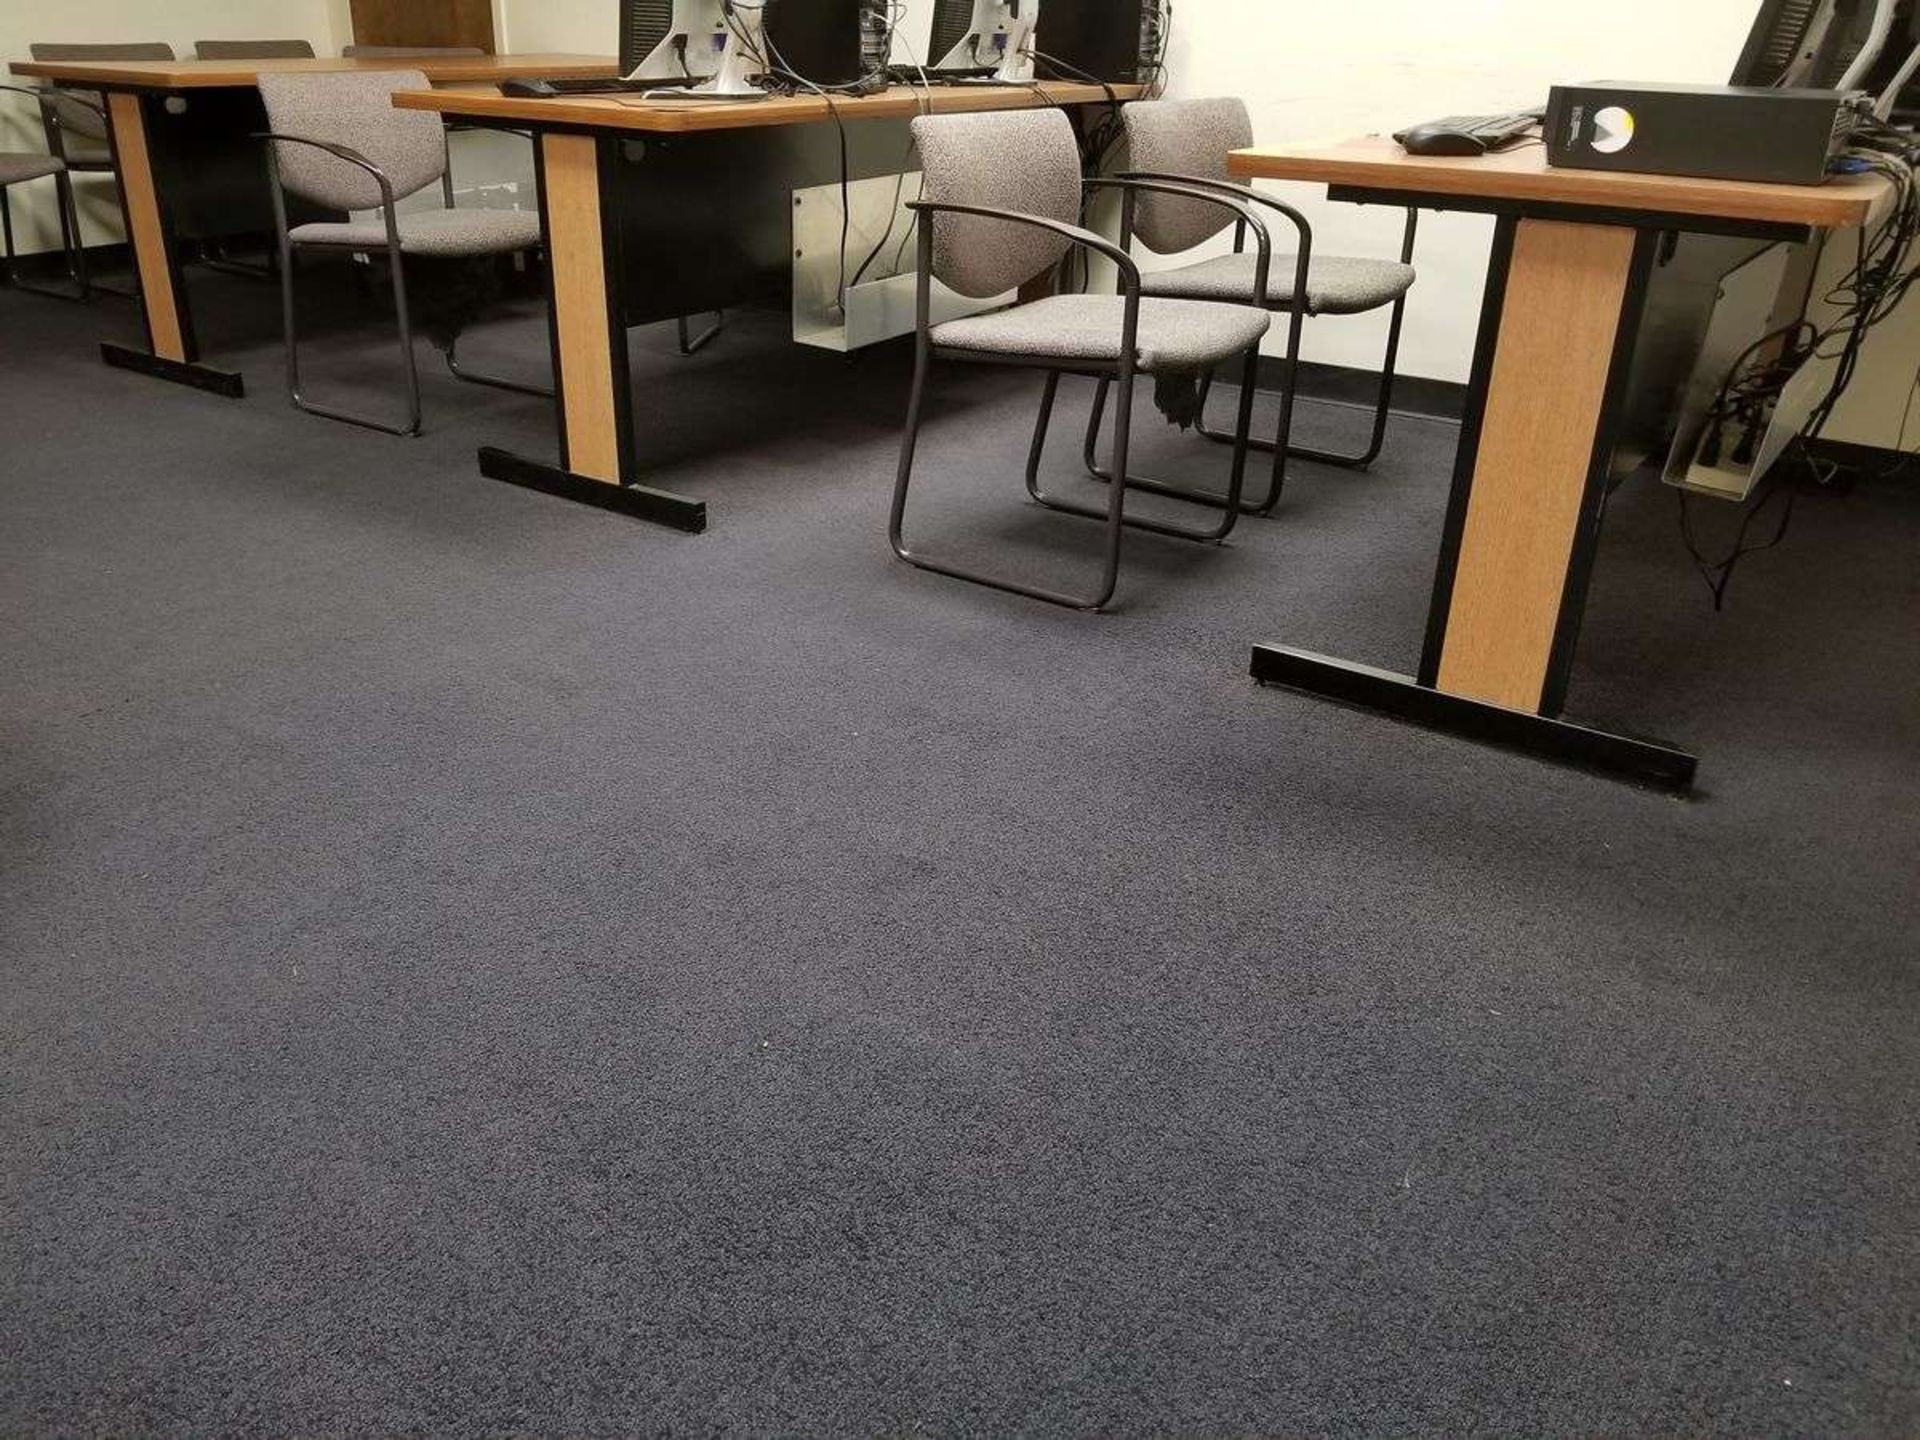 Office Furniture - Image 6 of 18